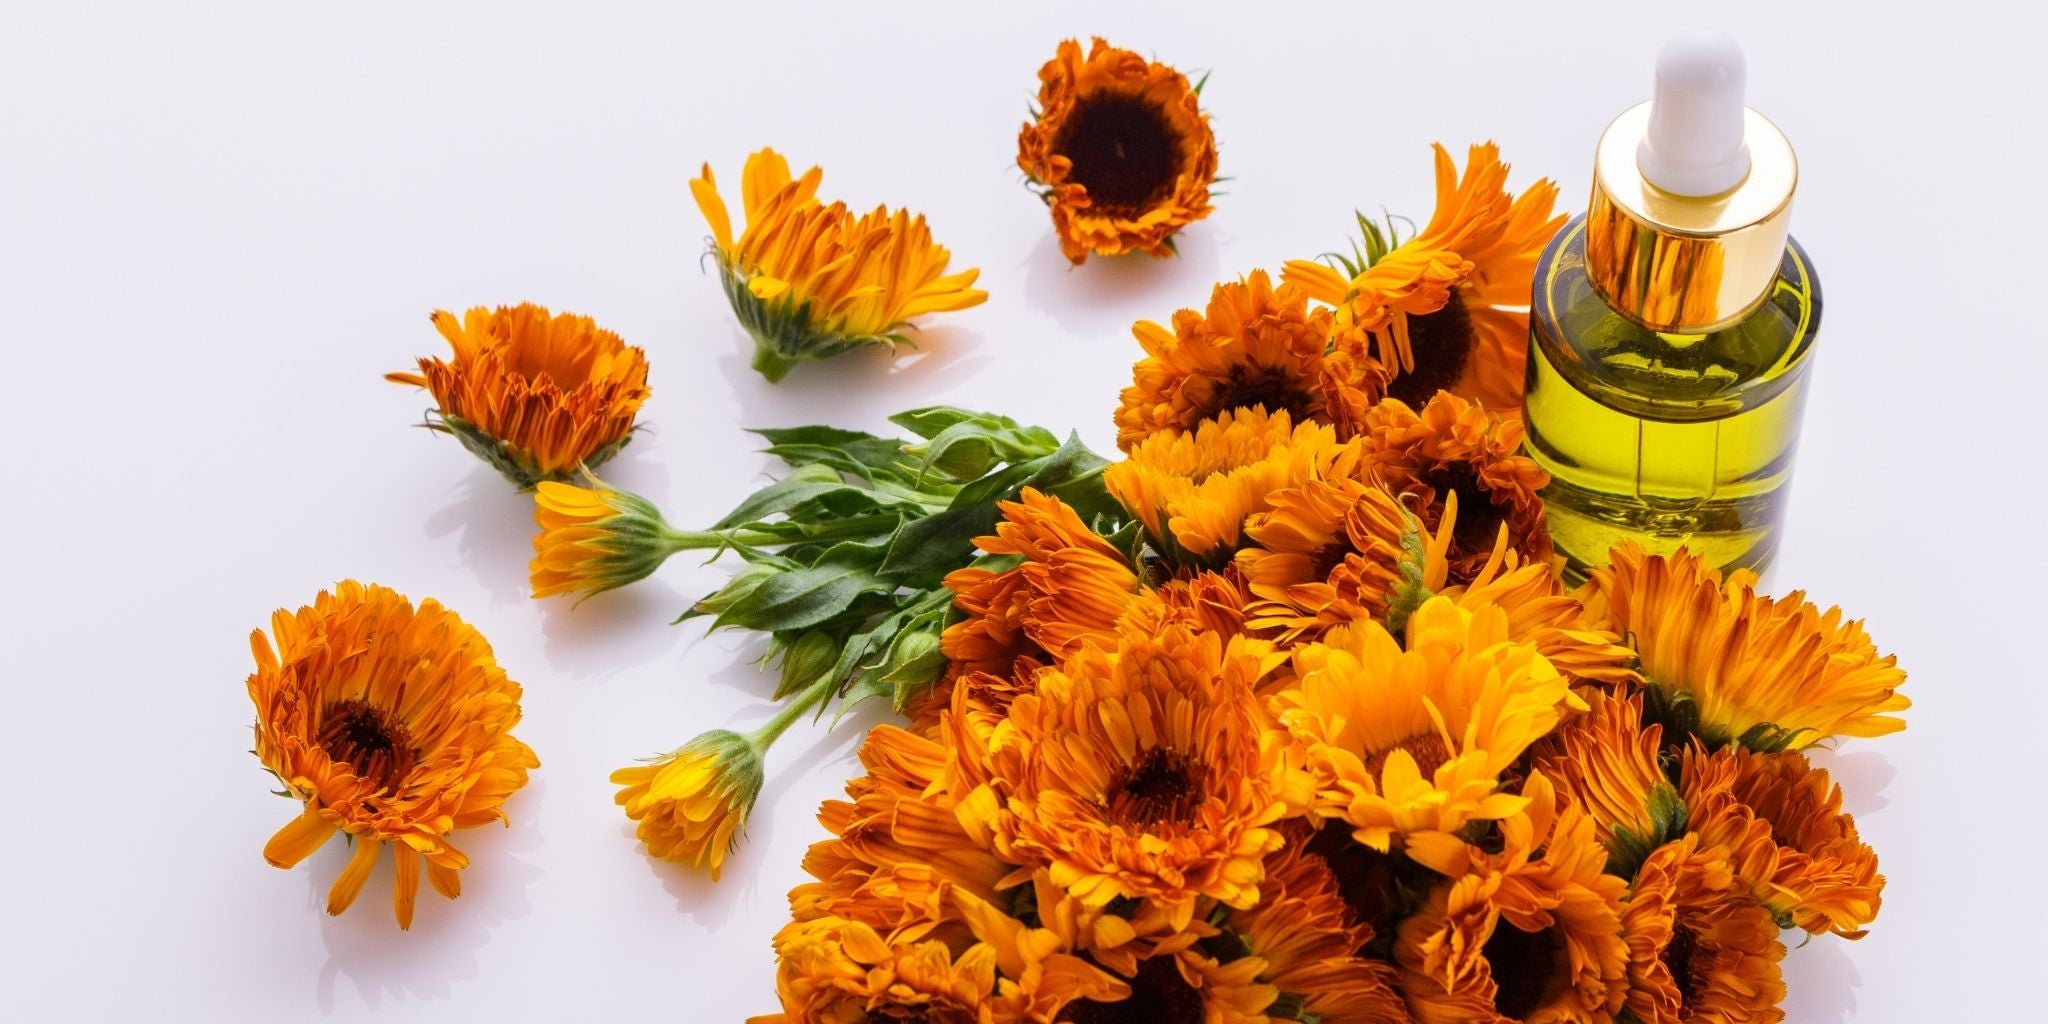 Arnica Massage Oil Benefits and Health Tips